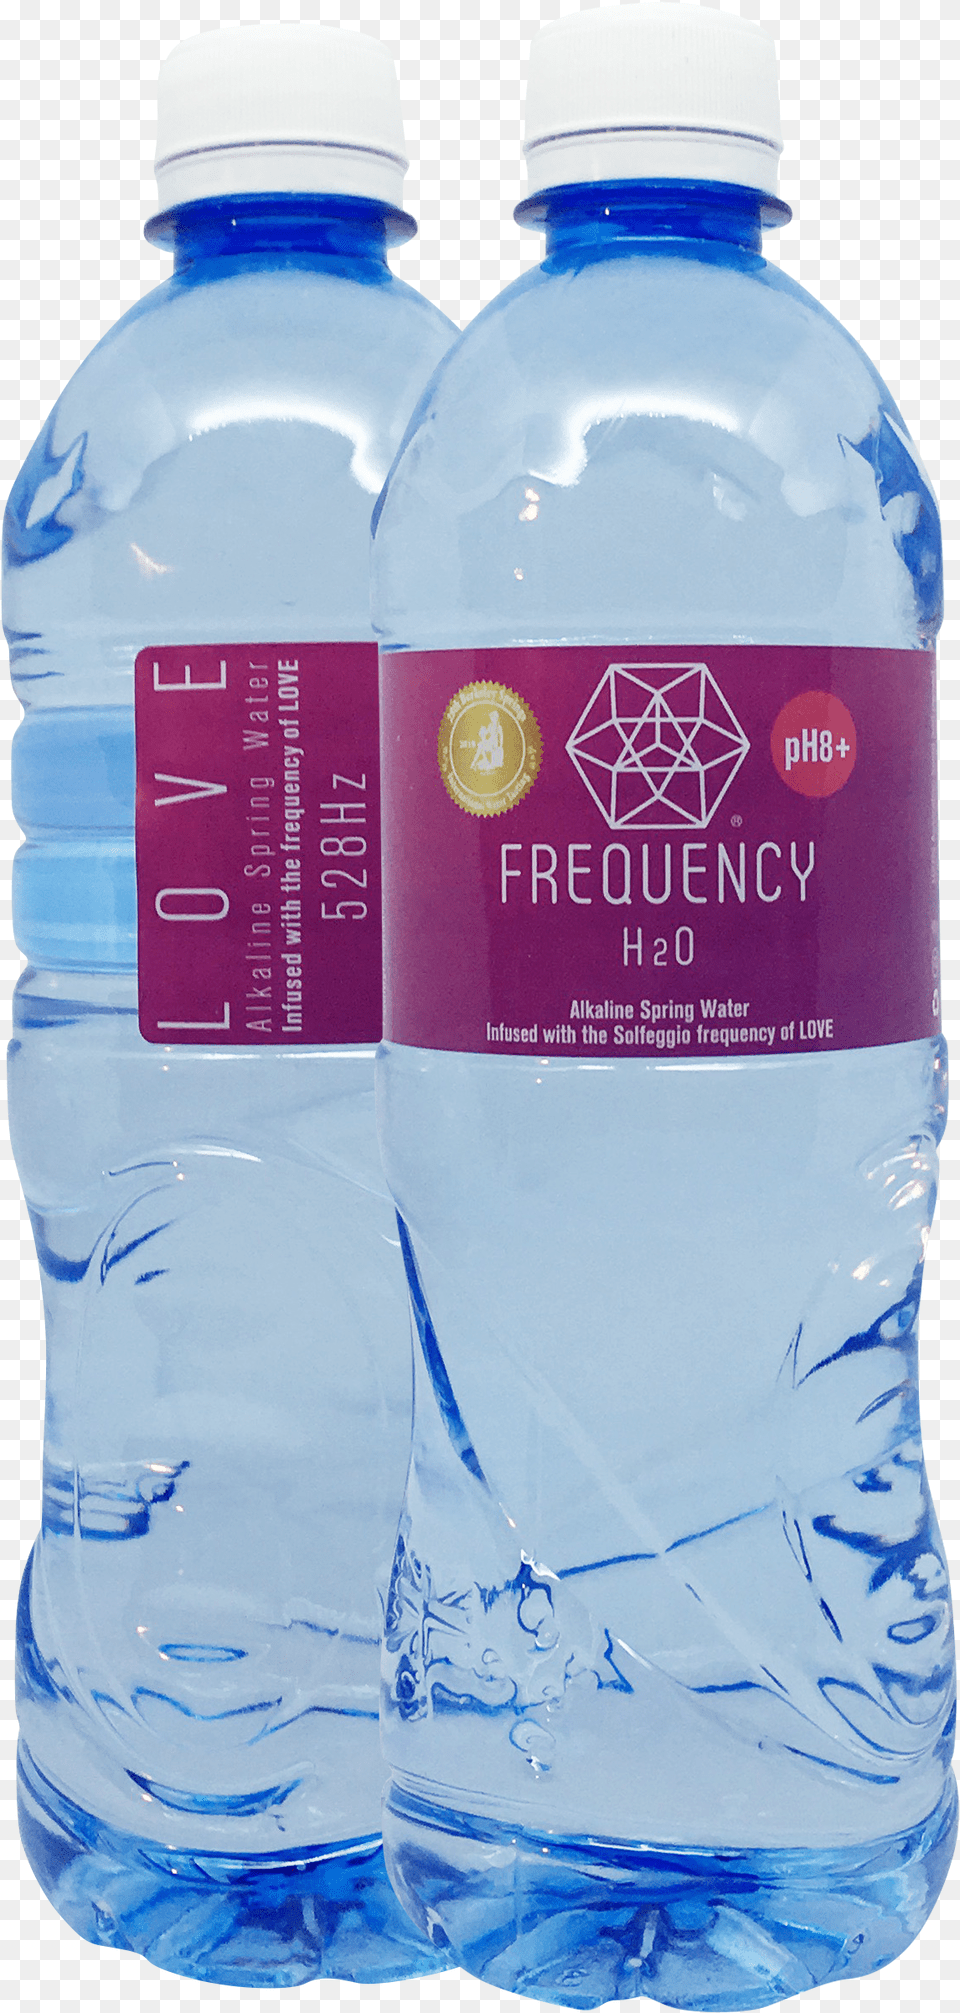 Love Frequency 21 X 600mlclass Lazyload Lazyload Frequency H2o Alkaline Spring Water Love, Beverage, Bottle, Mineral Water, Water Bottle Png